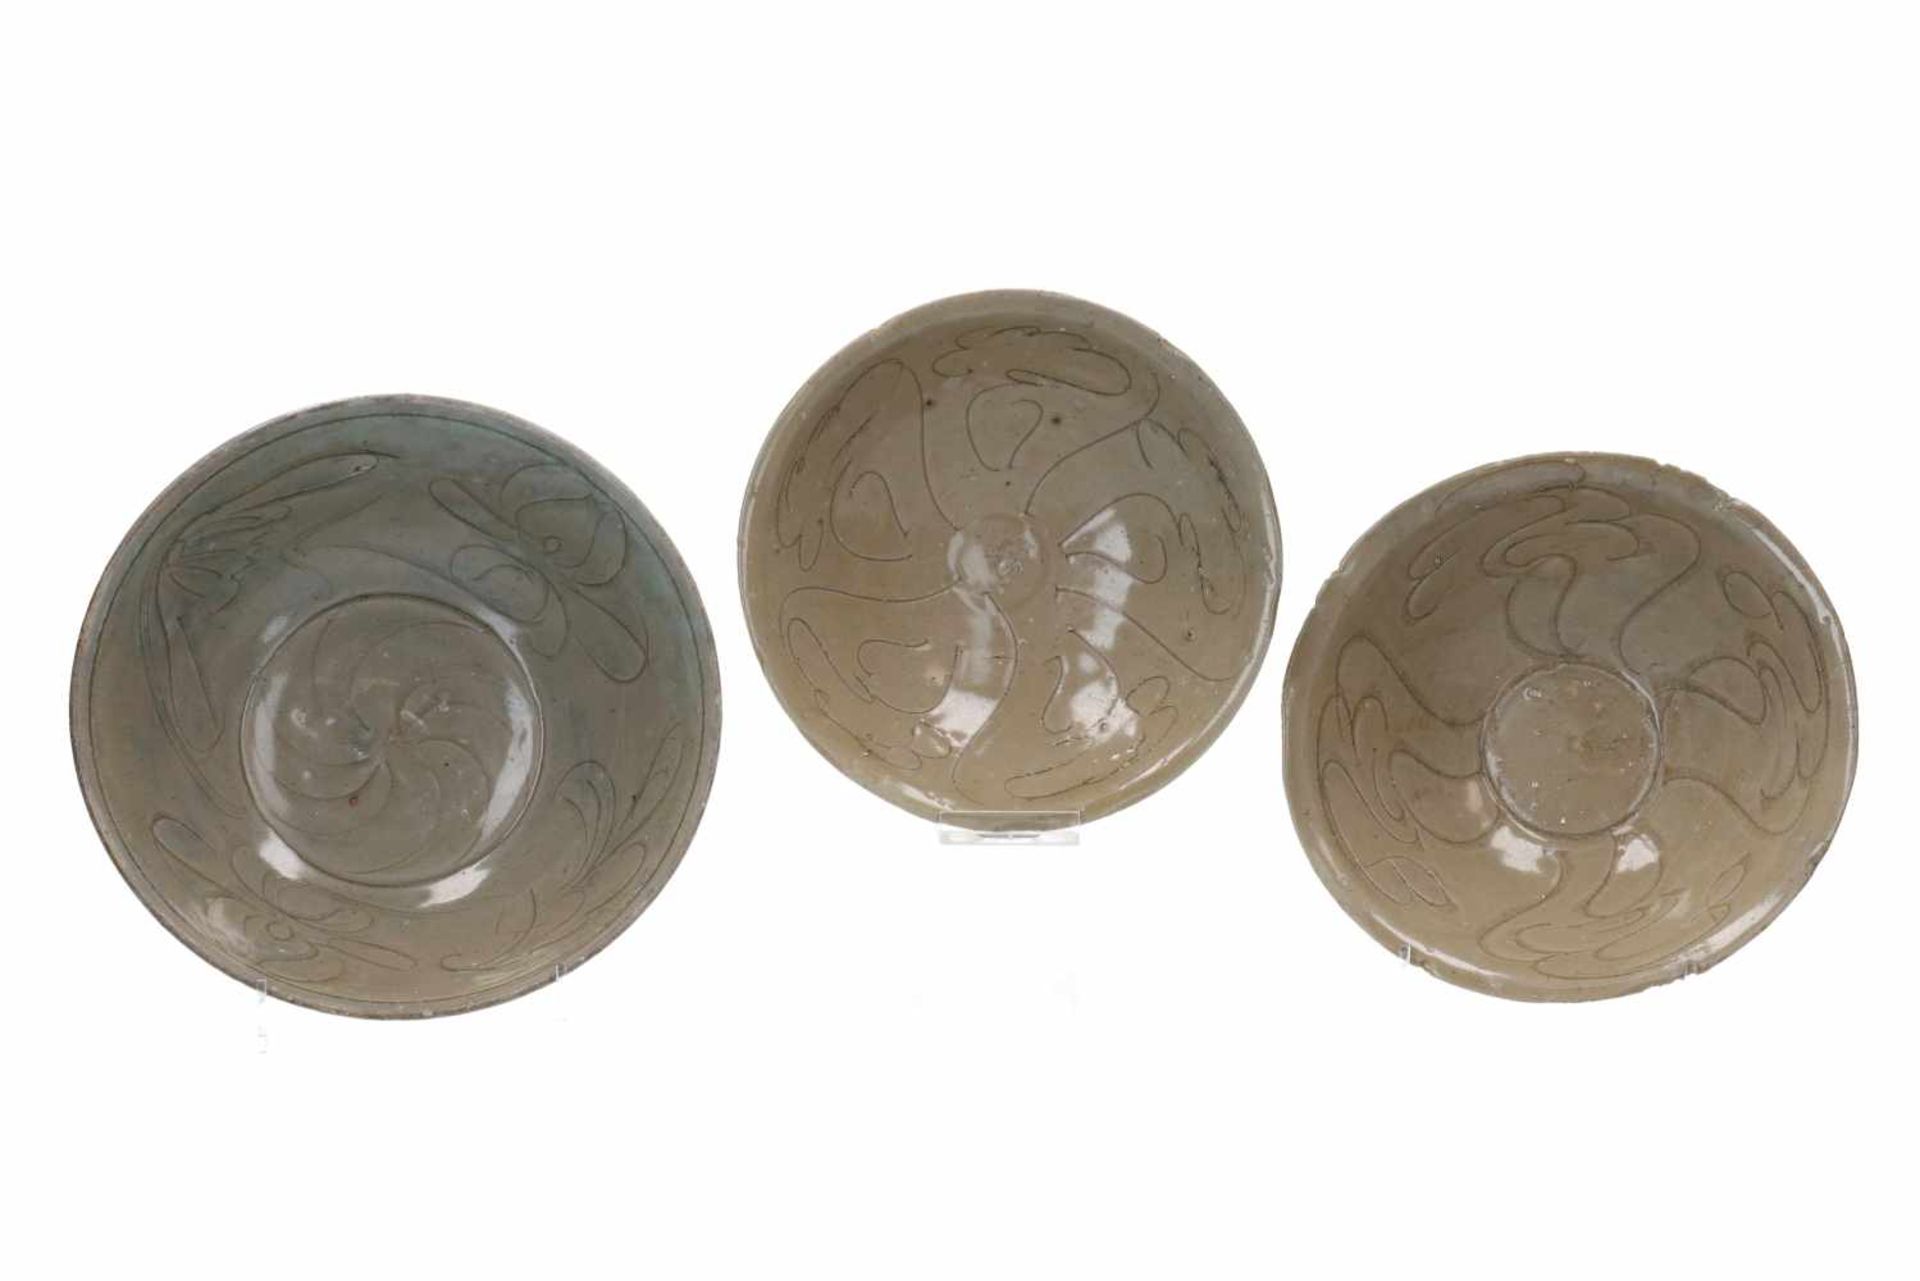 Lot of three celadon glazed bowls with abstract decor of clouds or flowers. Unmarked. China, Song.